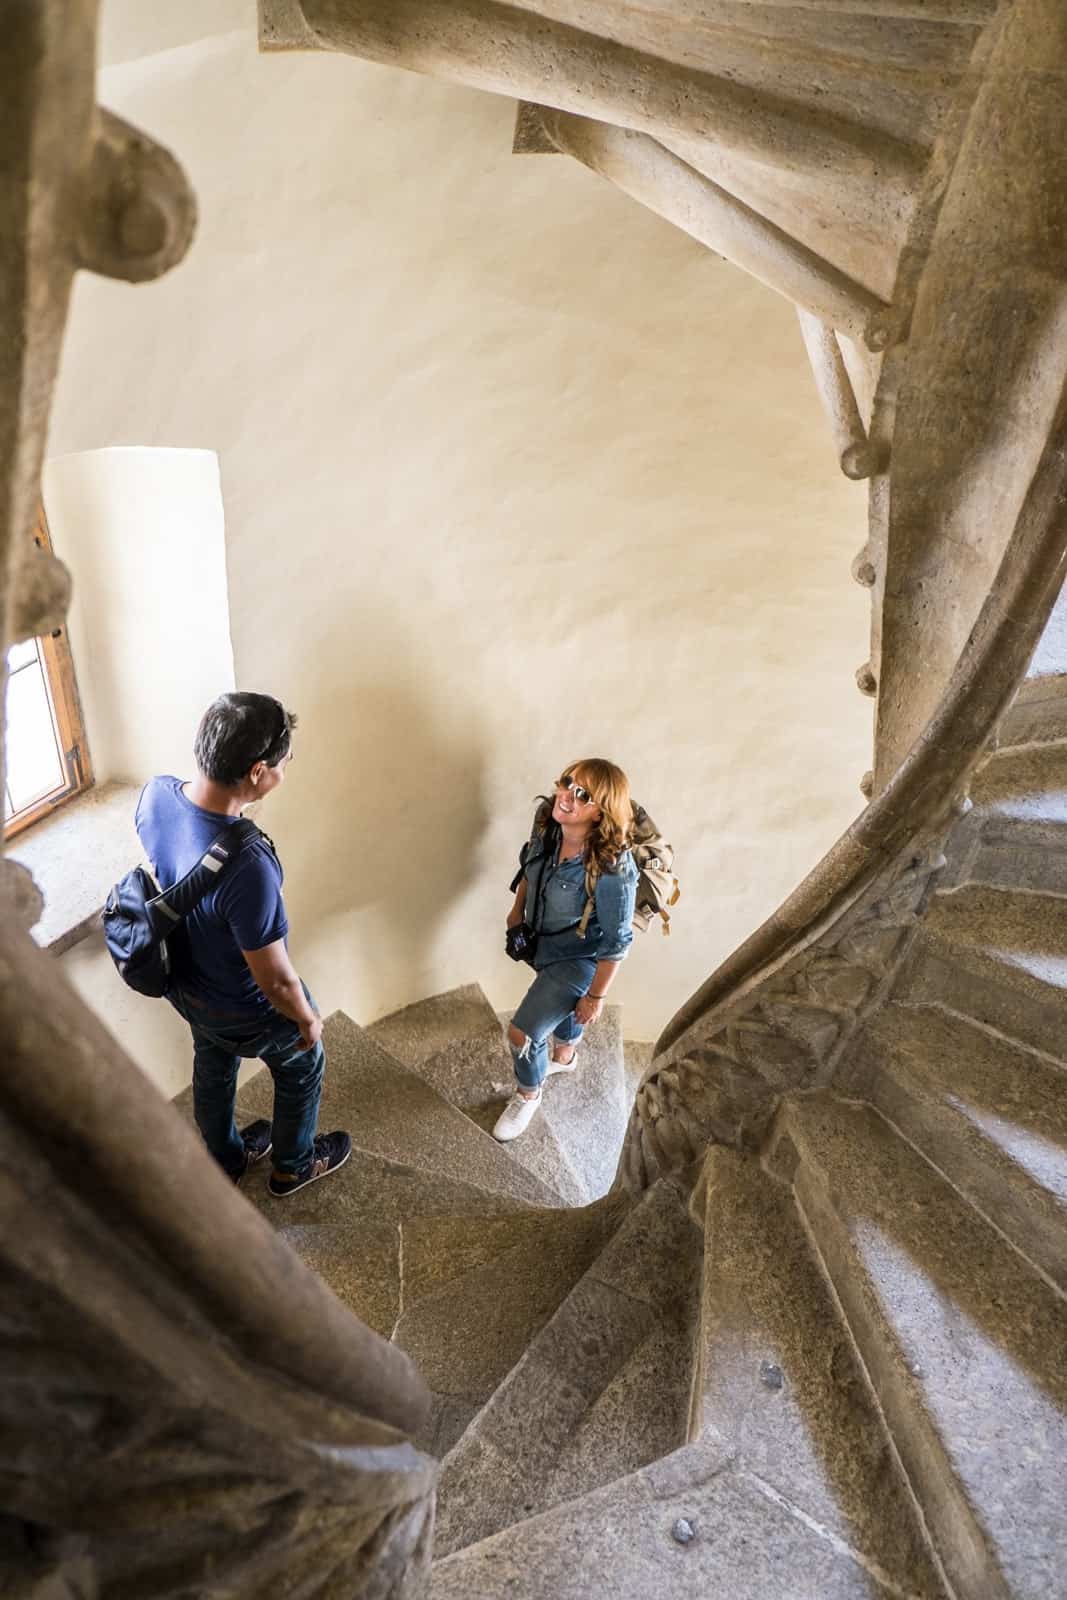 A man and woman meet on the stone steps of the double spiral staircase in Graz, Austria.